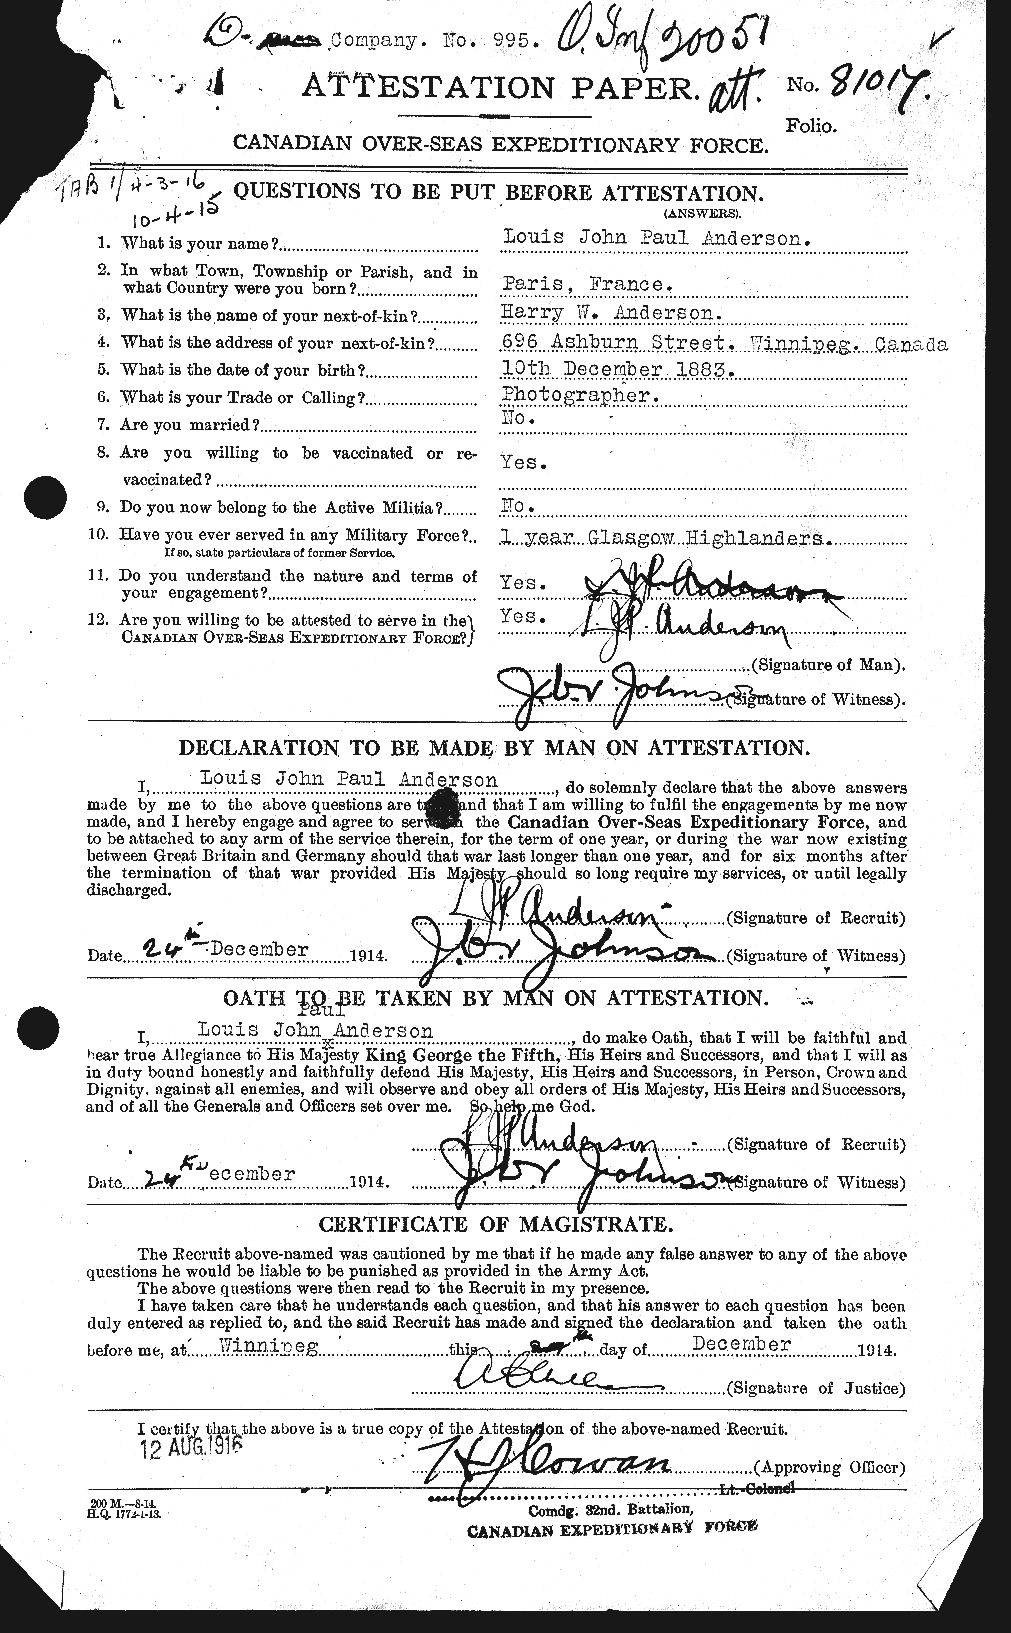 Personnel Records of the First World War - CEF 207494a